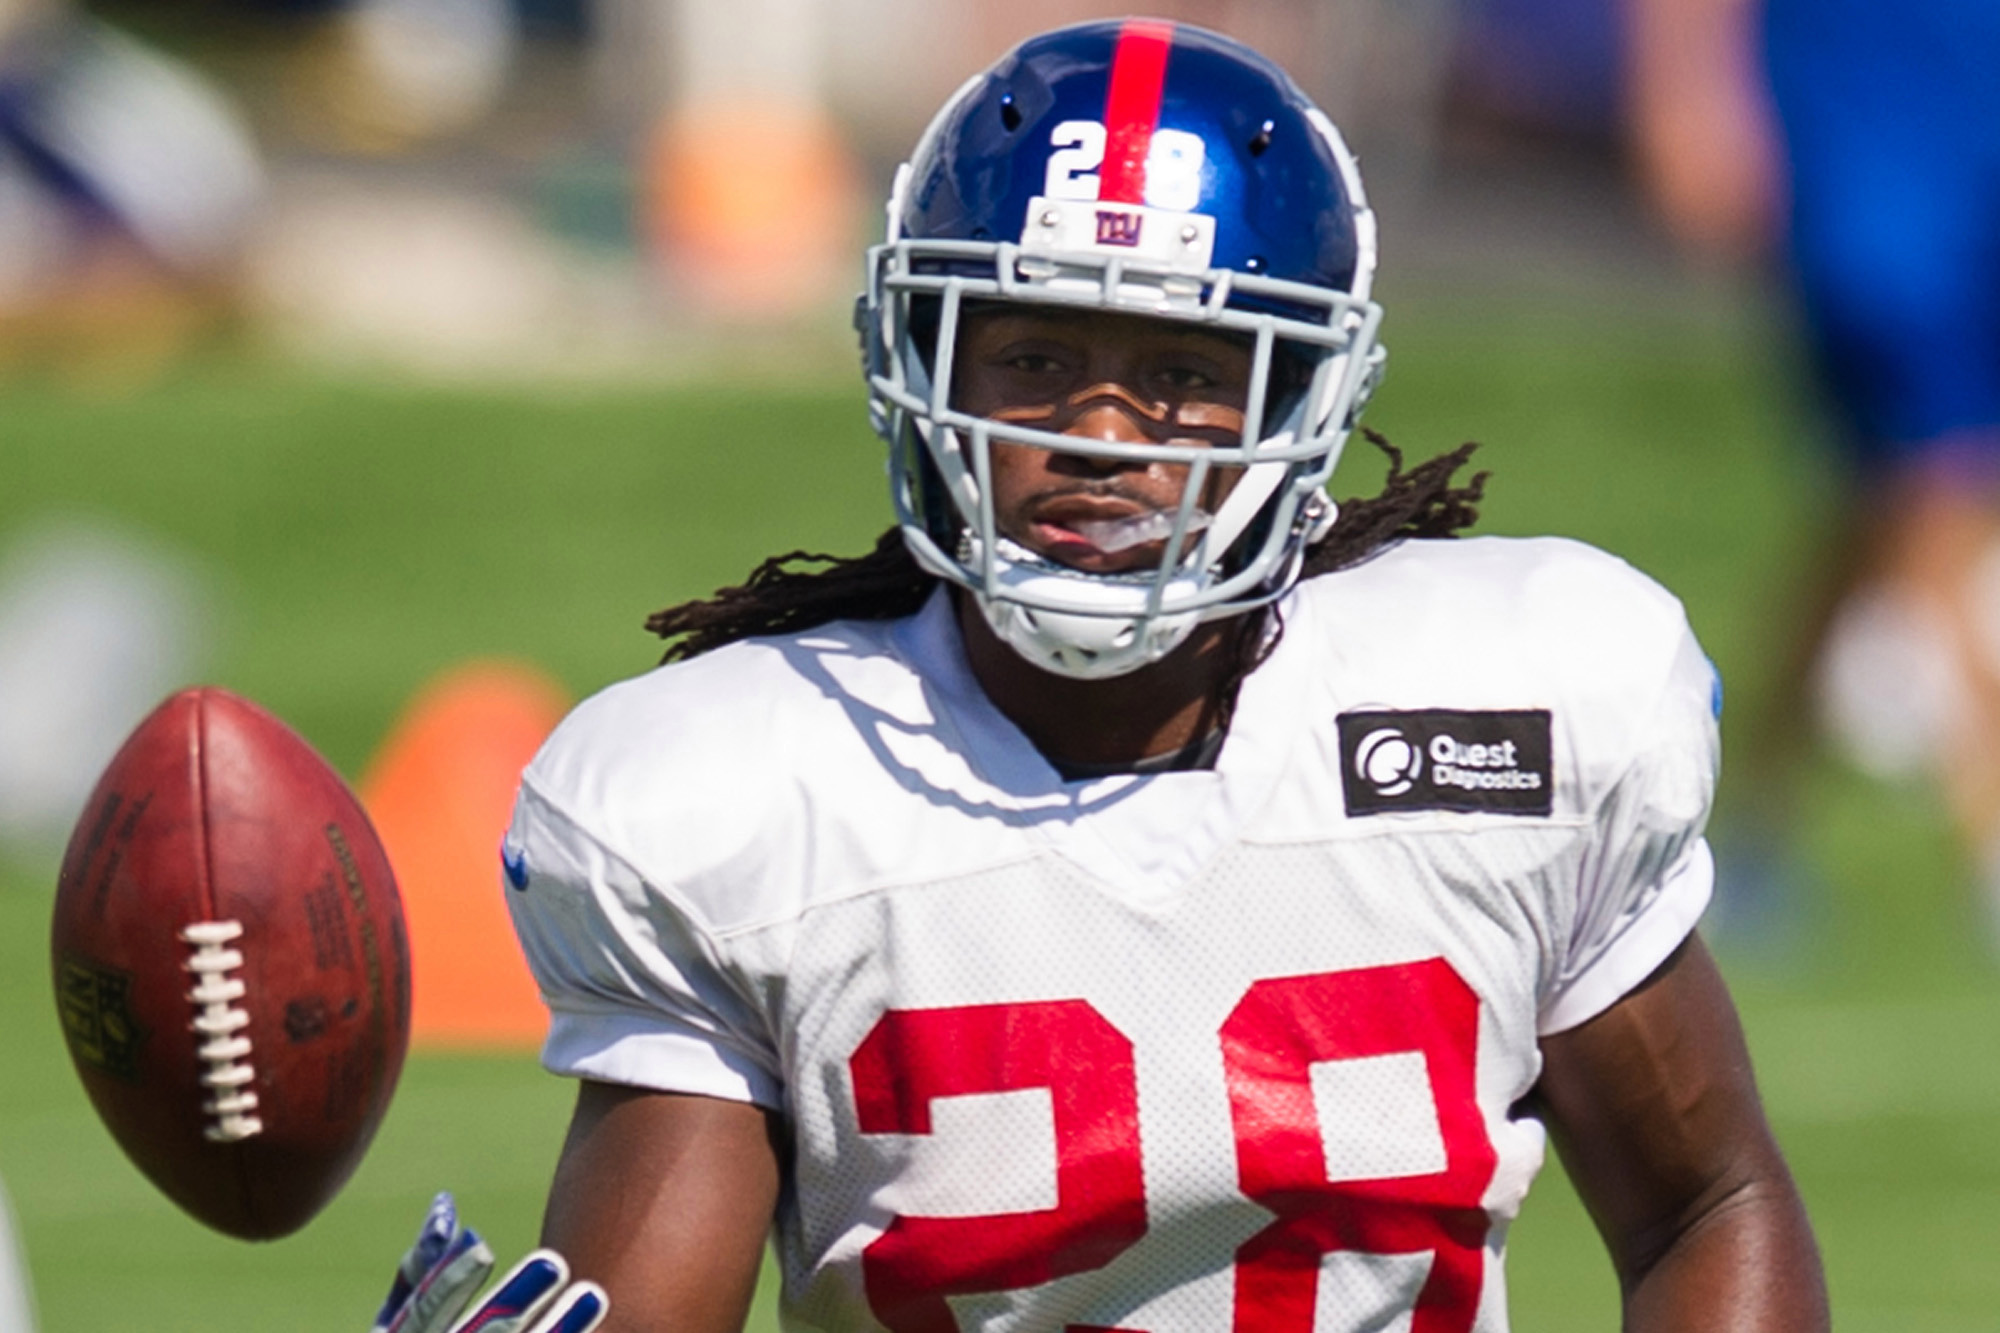 The running back Giants just can’t get rid of Fitness